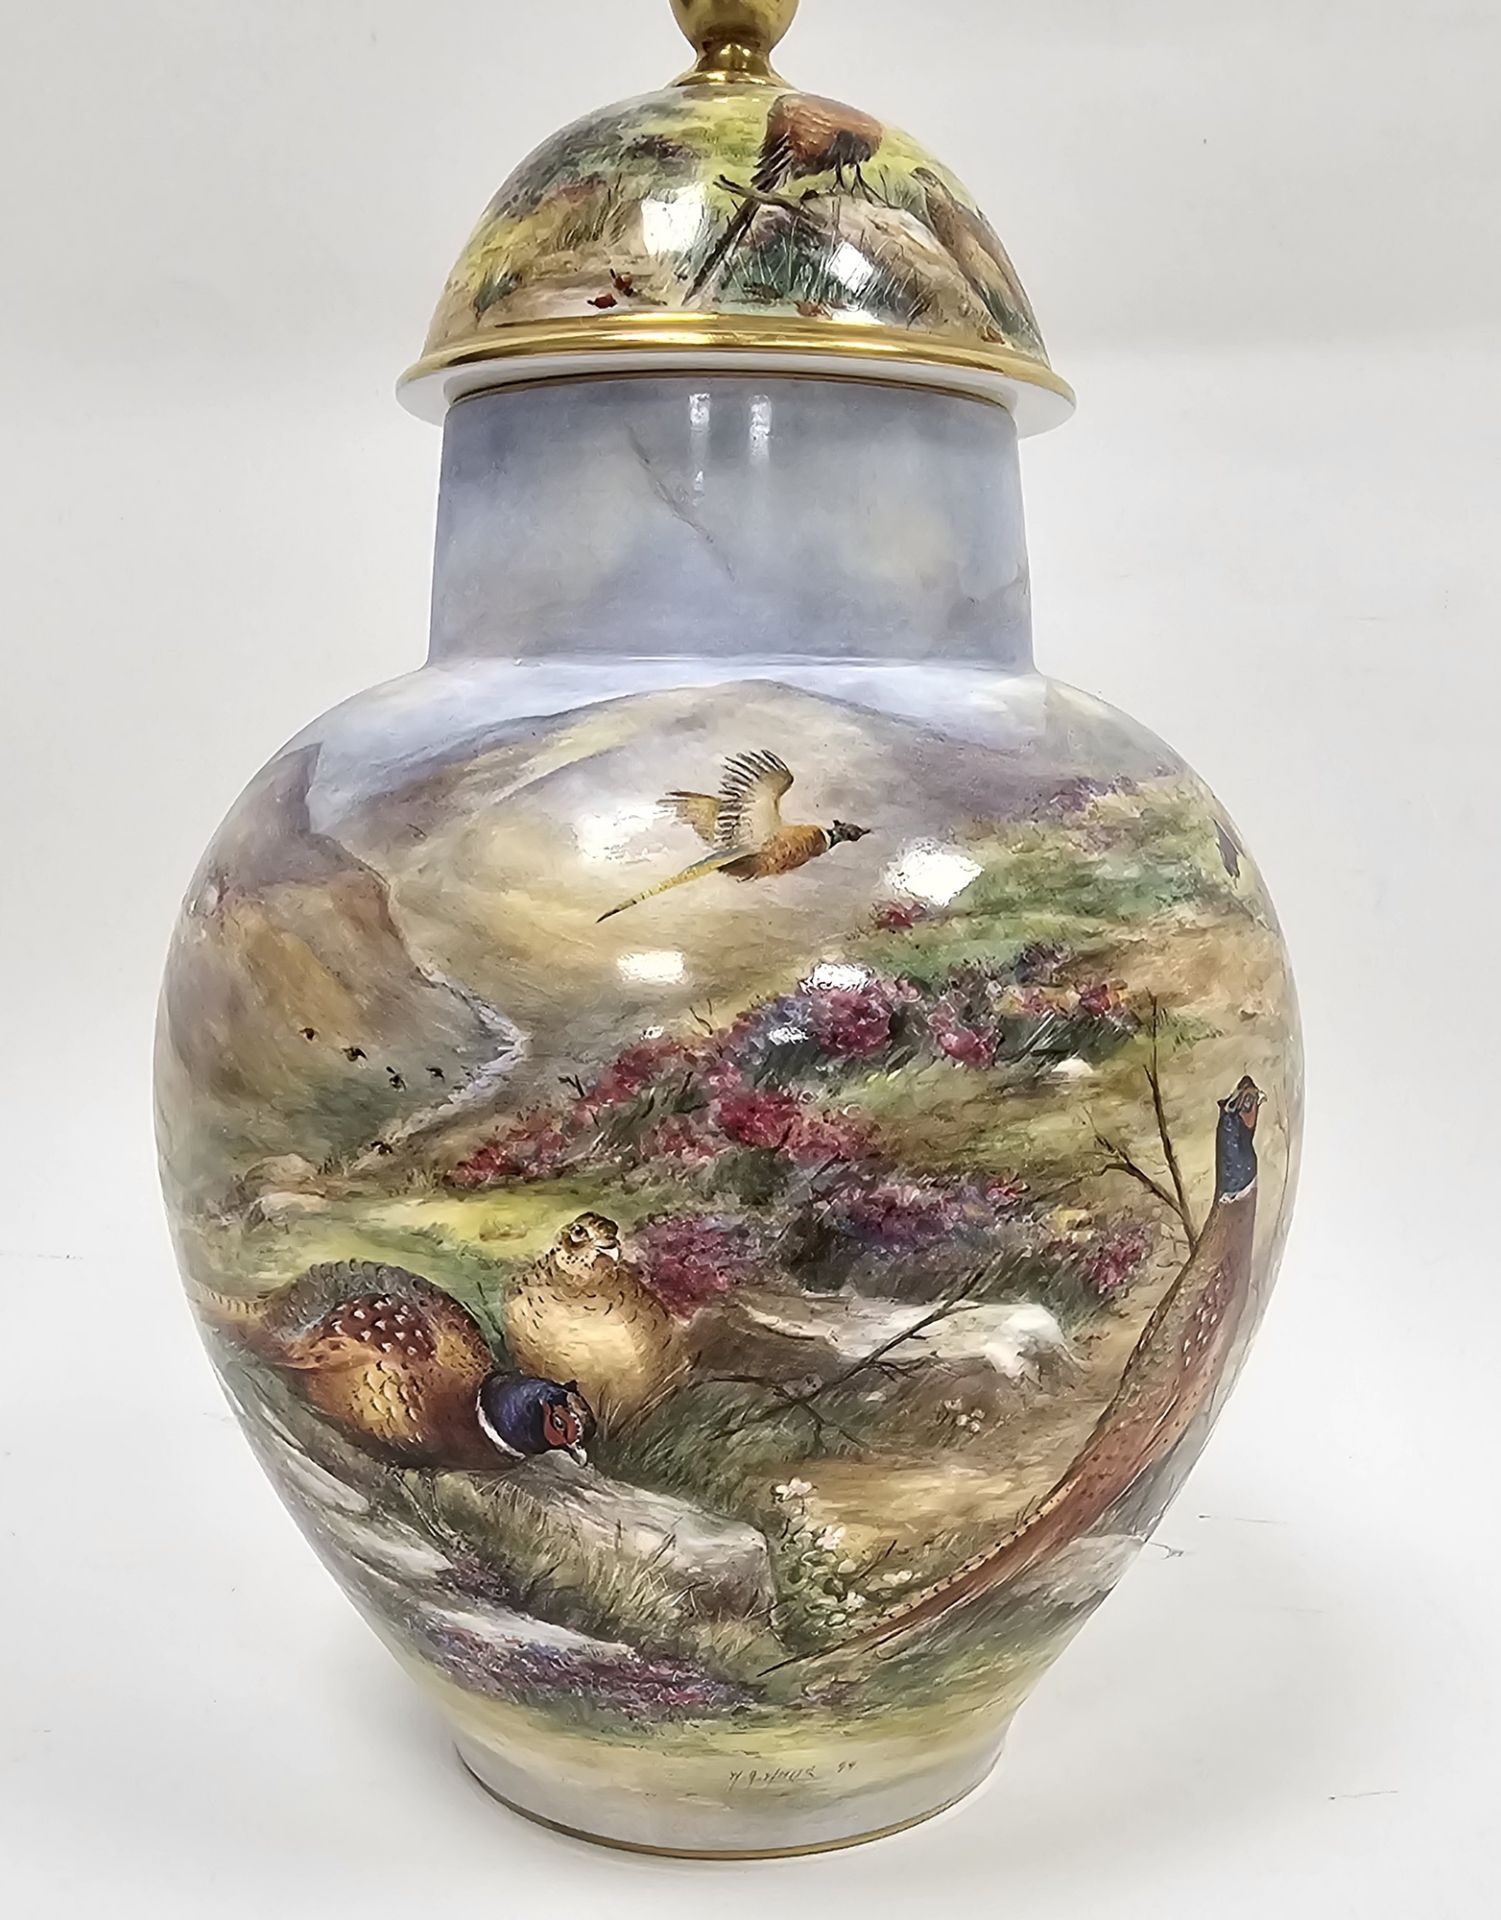 Contemporary bone china oviform vase with domed cover, painted by Wendy Ann White, printed scroll - Image 2 of 4